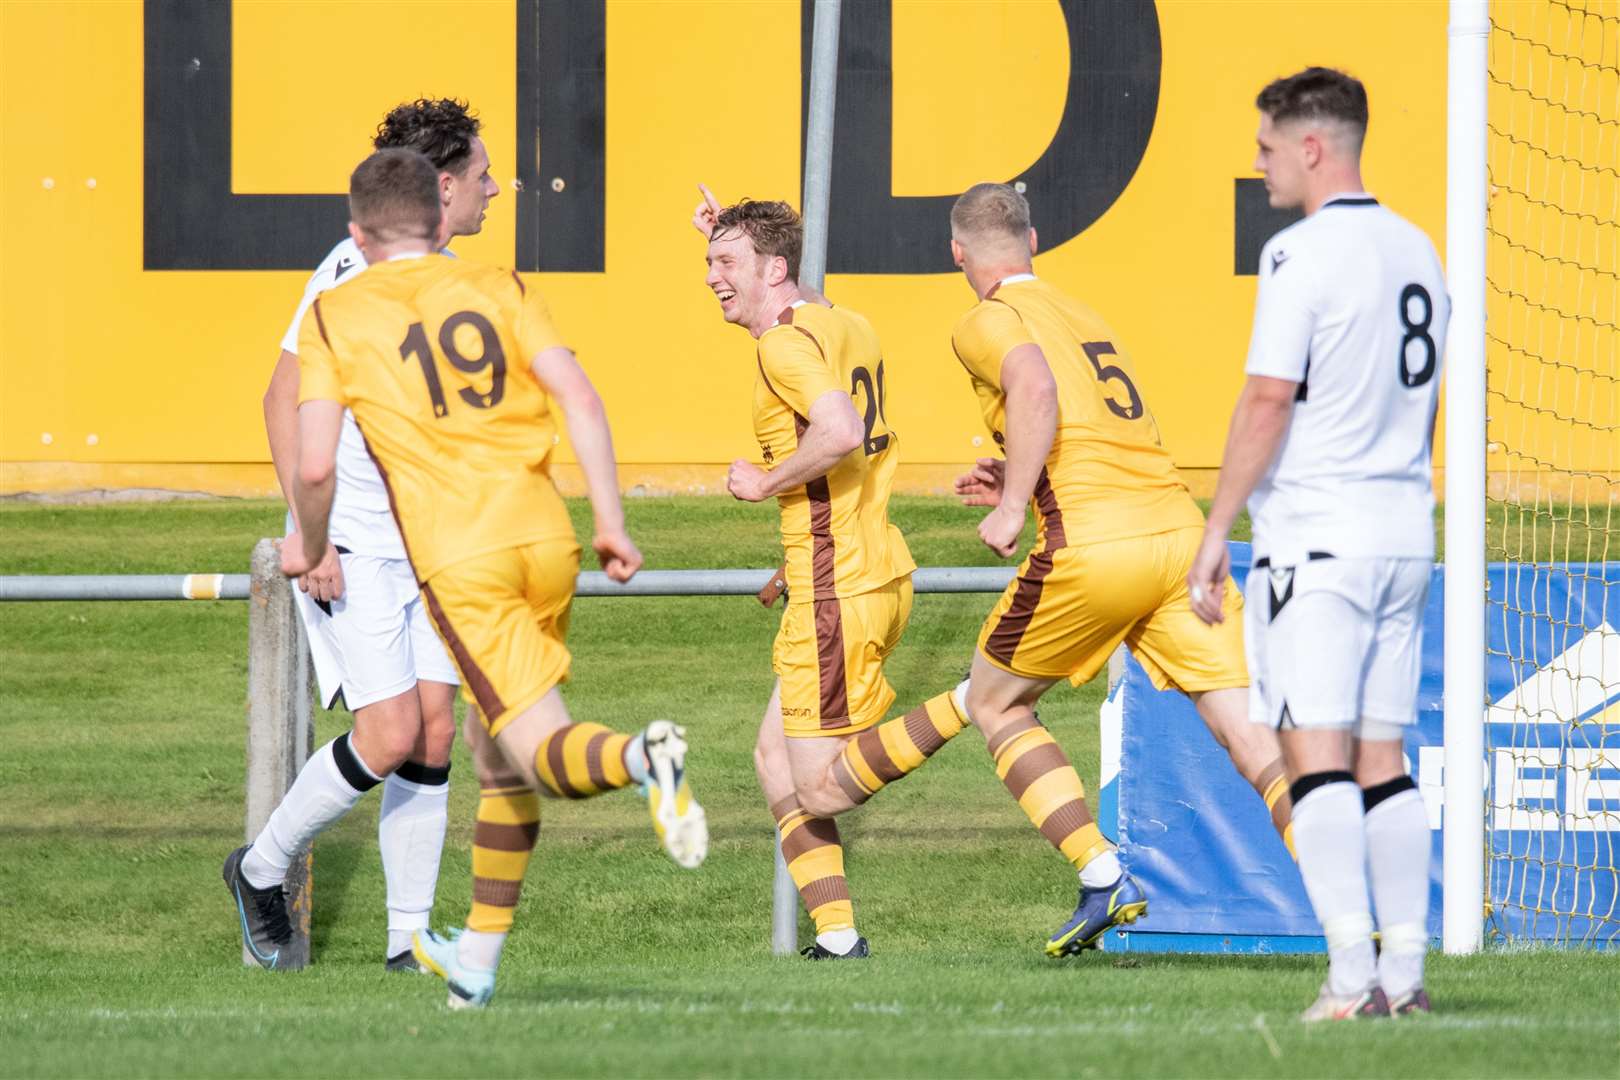 #20 Connall Ewan celebrates scoring Forres' third goal of the afternoon. ...Forres Mechanics FC (4) vs Rothes FC (3) - Highland Football League 22/23 - Mosset Park, Forres 01/10/2022...Picture: Daniel Forsyth..